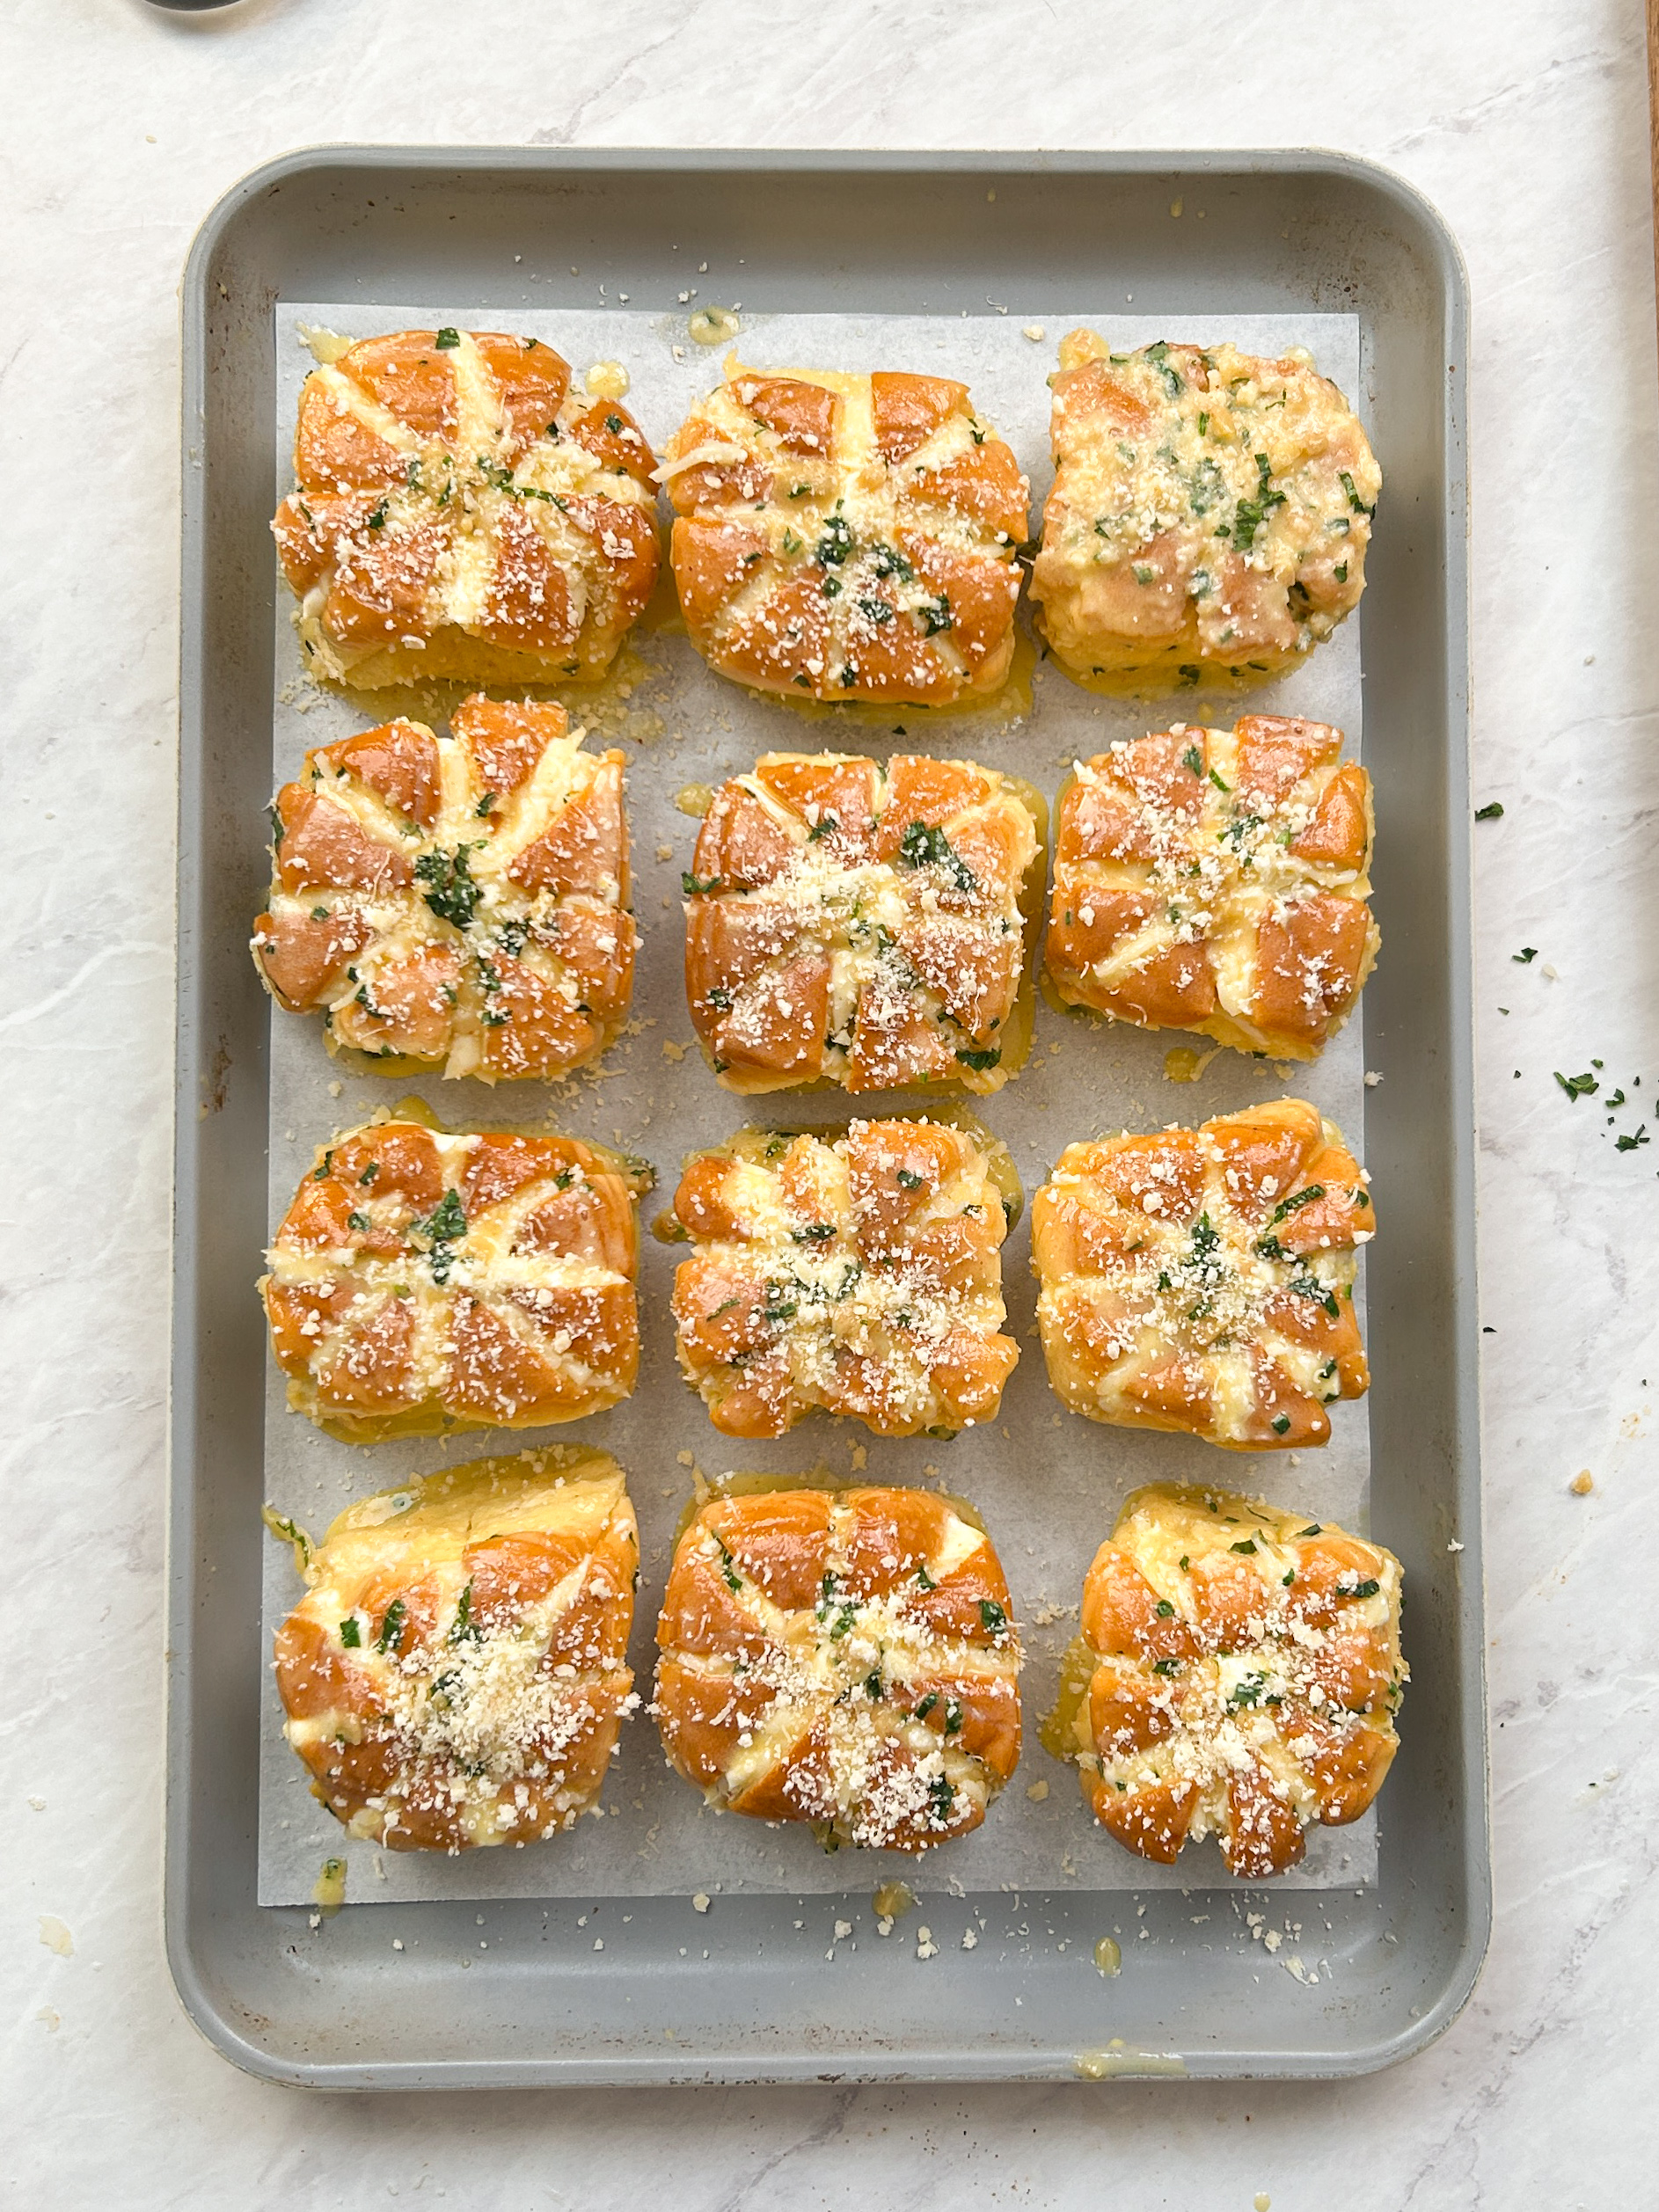 12 korean cream cheese garlic buns filled with cream cheese, dipped in garlic custard, and topped with parmesan cheese on a baking sheet